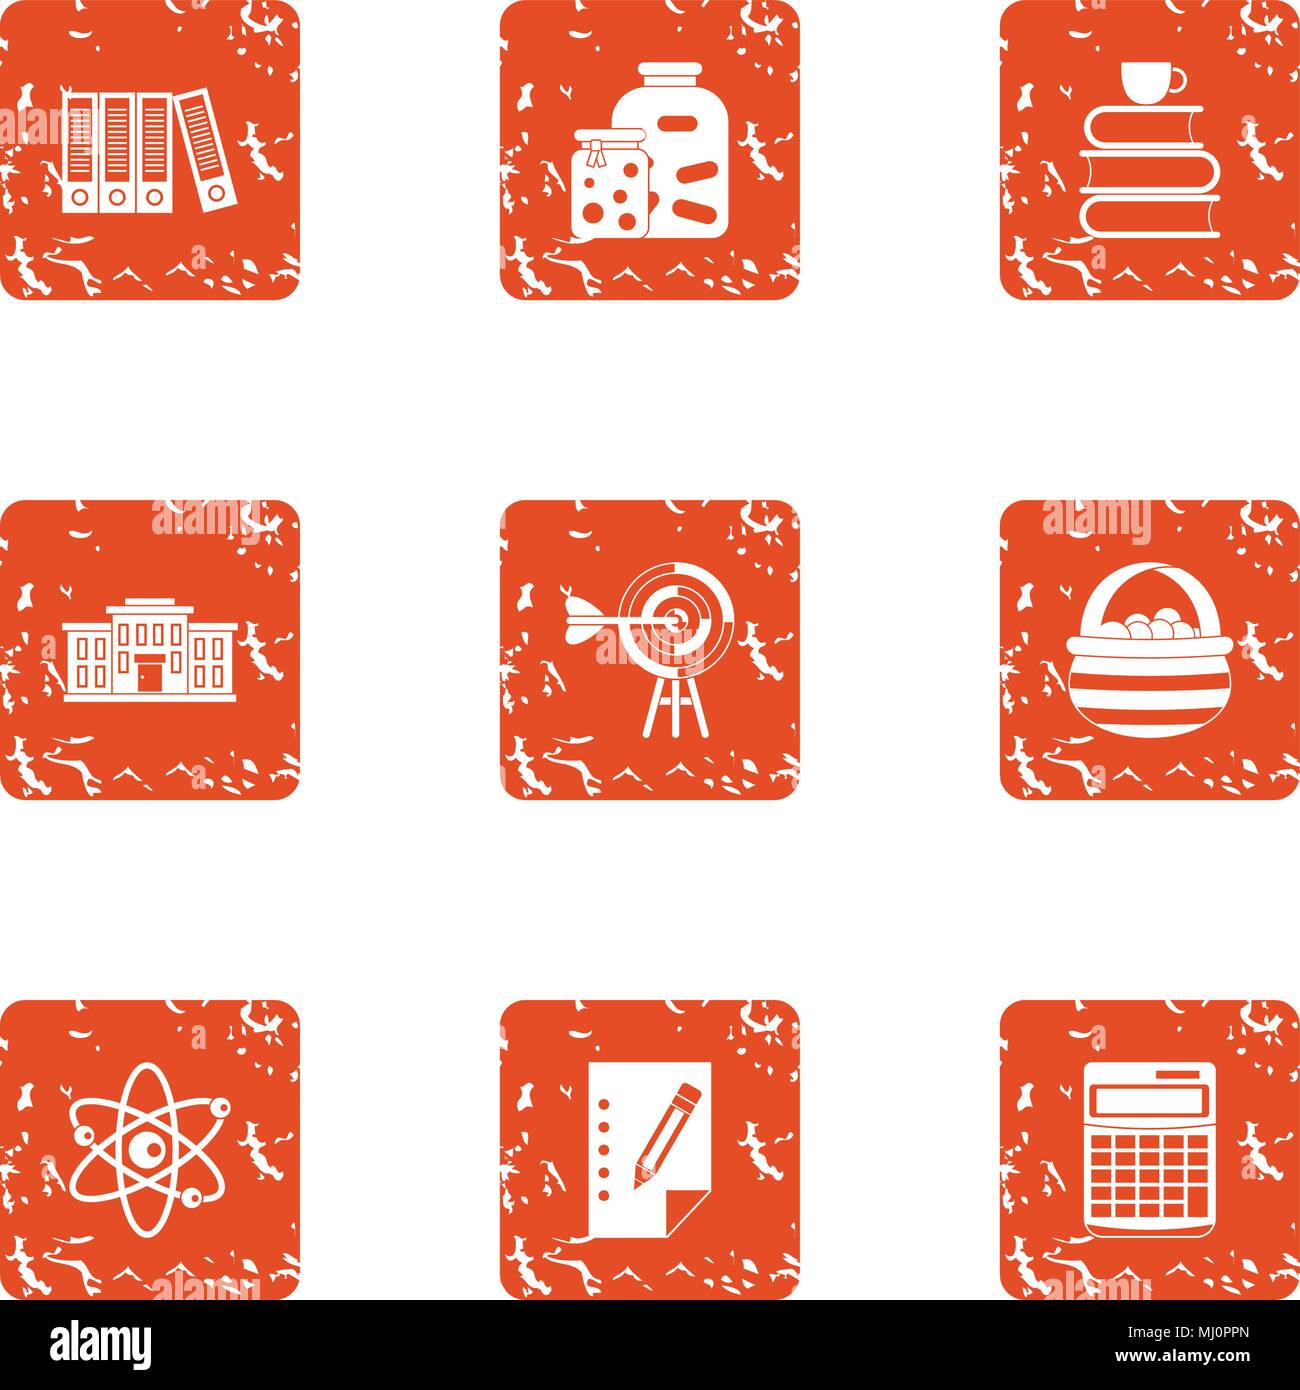 Scientific paper icons set, grunge style Stock Vector